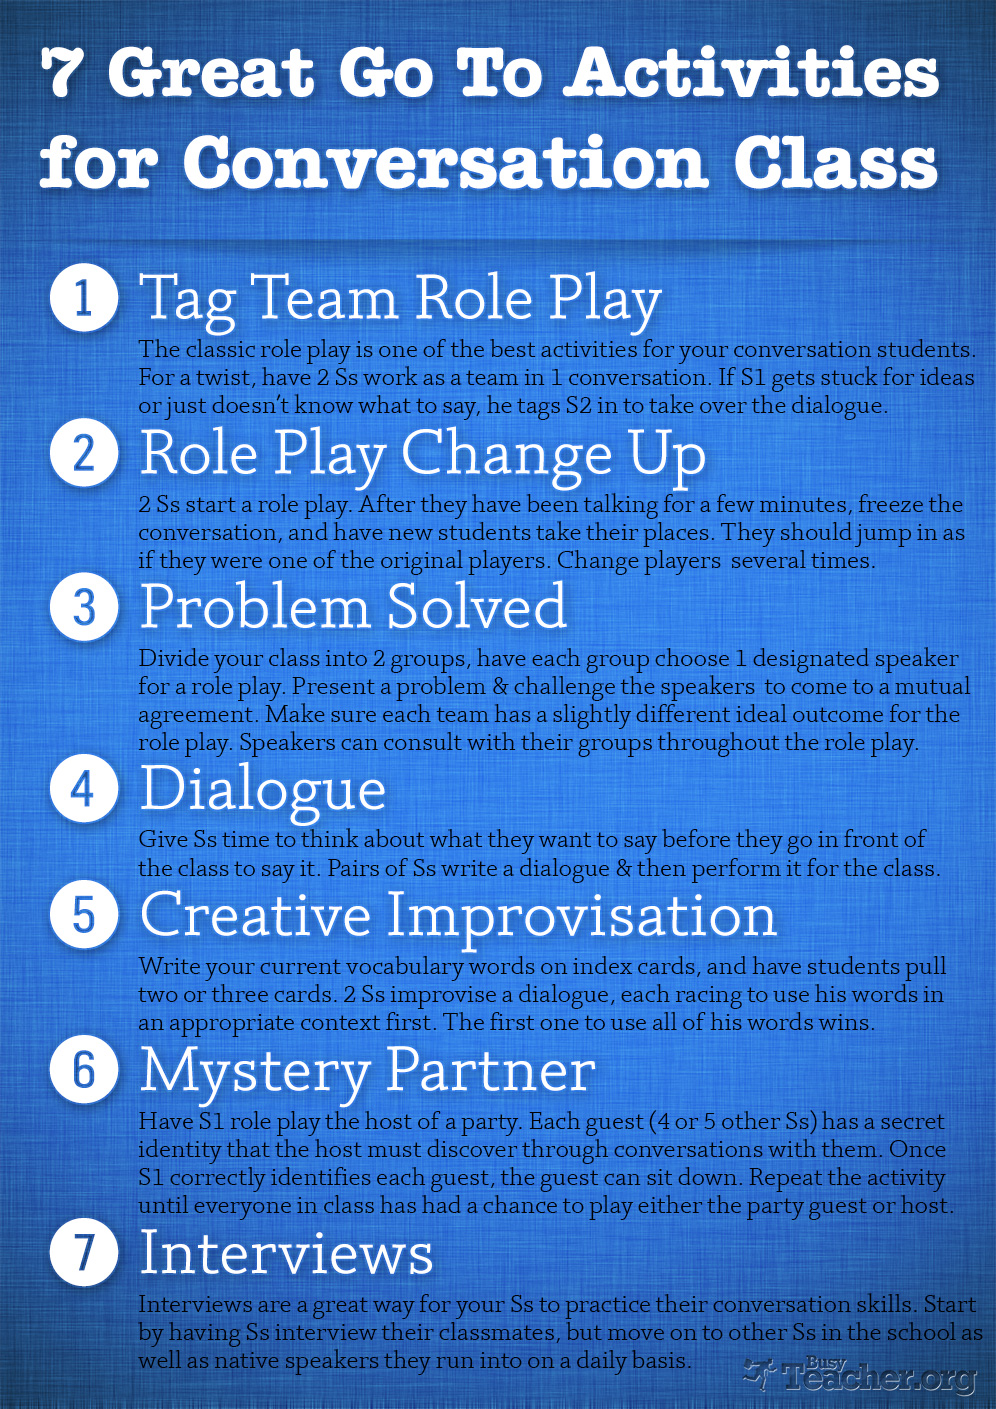 7 Great Go To Activities for Conversation Class: Poster